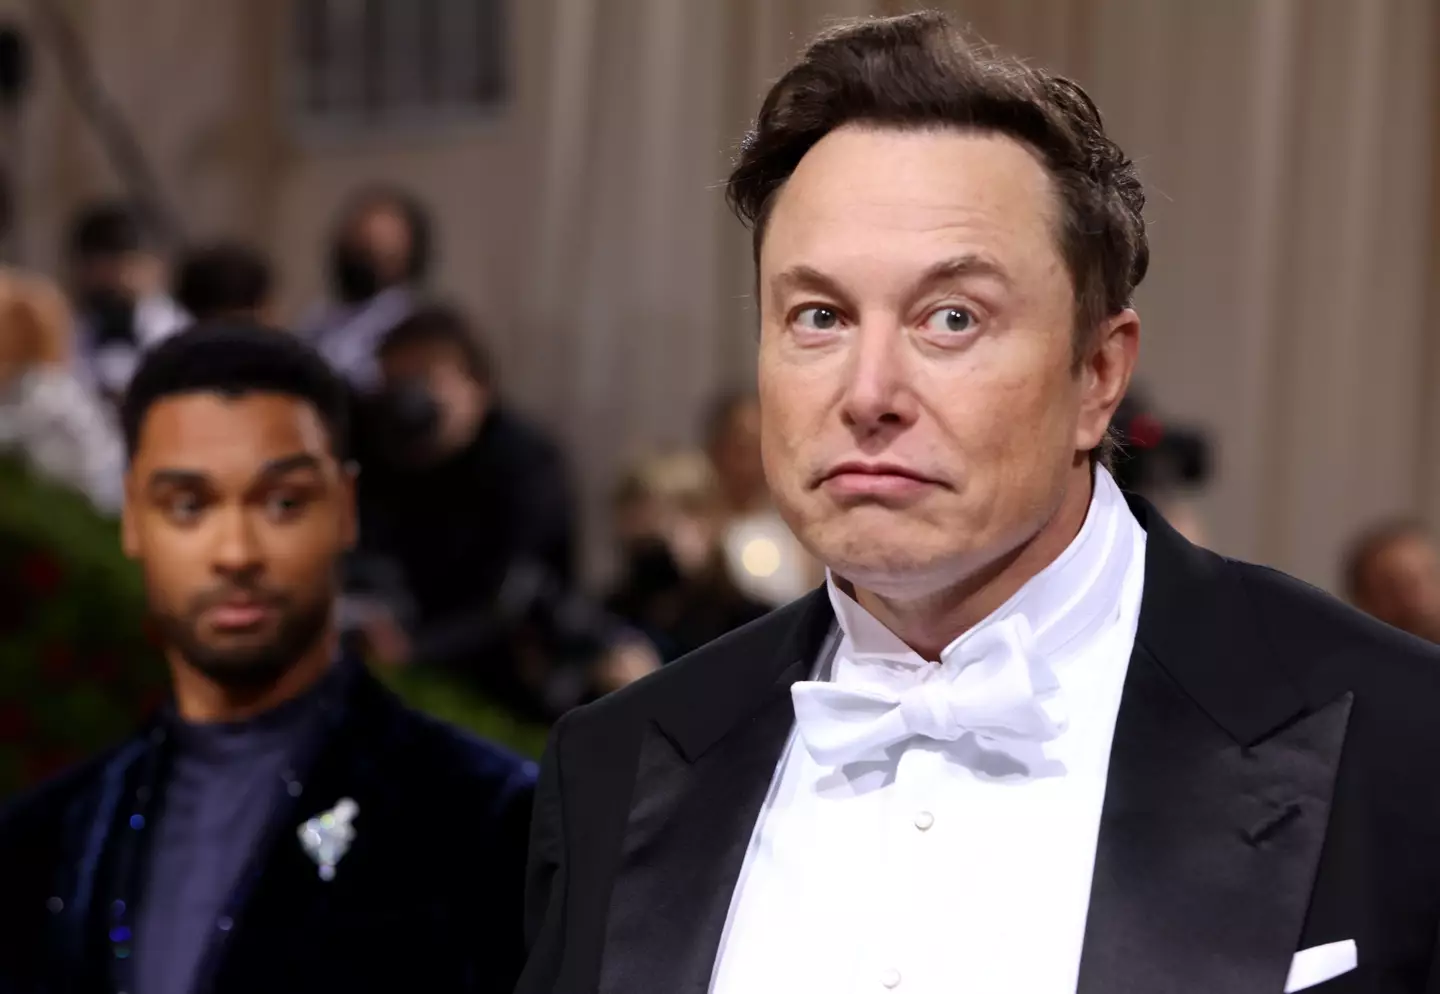 Elon Musk recently denied reports of sexual misconduct.